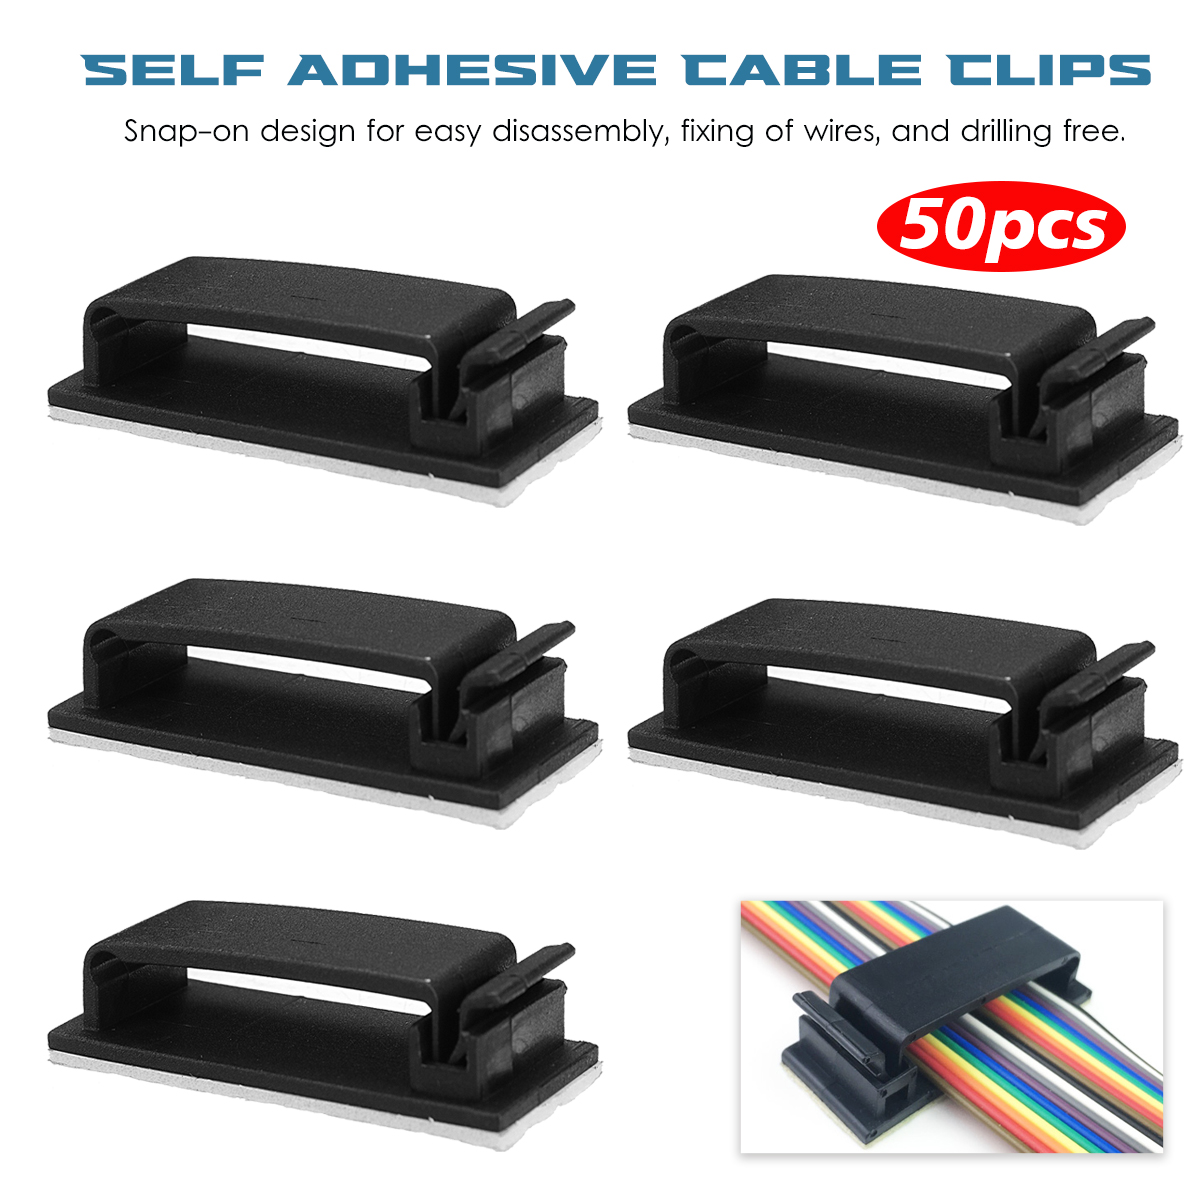 50Pcs-Cable-Clips-Self-Adhesive-Cord-Management-Wire-Holder-Organizer-Clamp-for-Computer-1935352-9